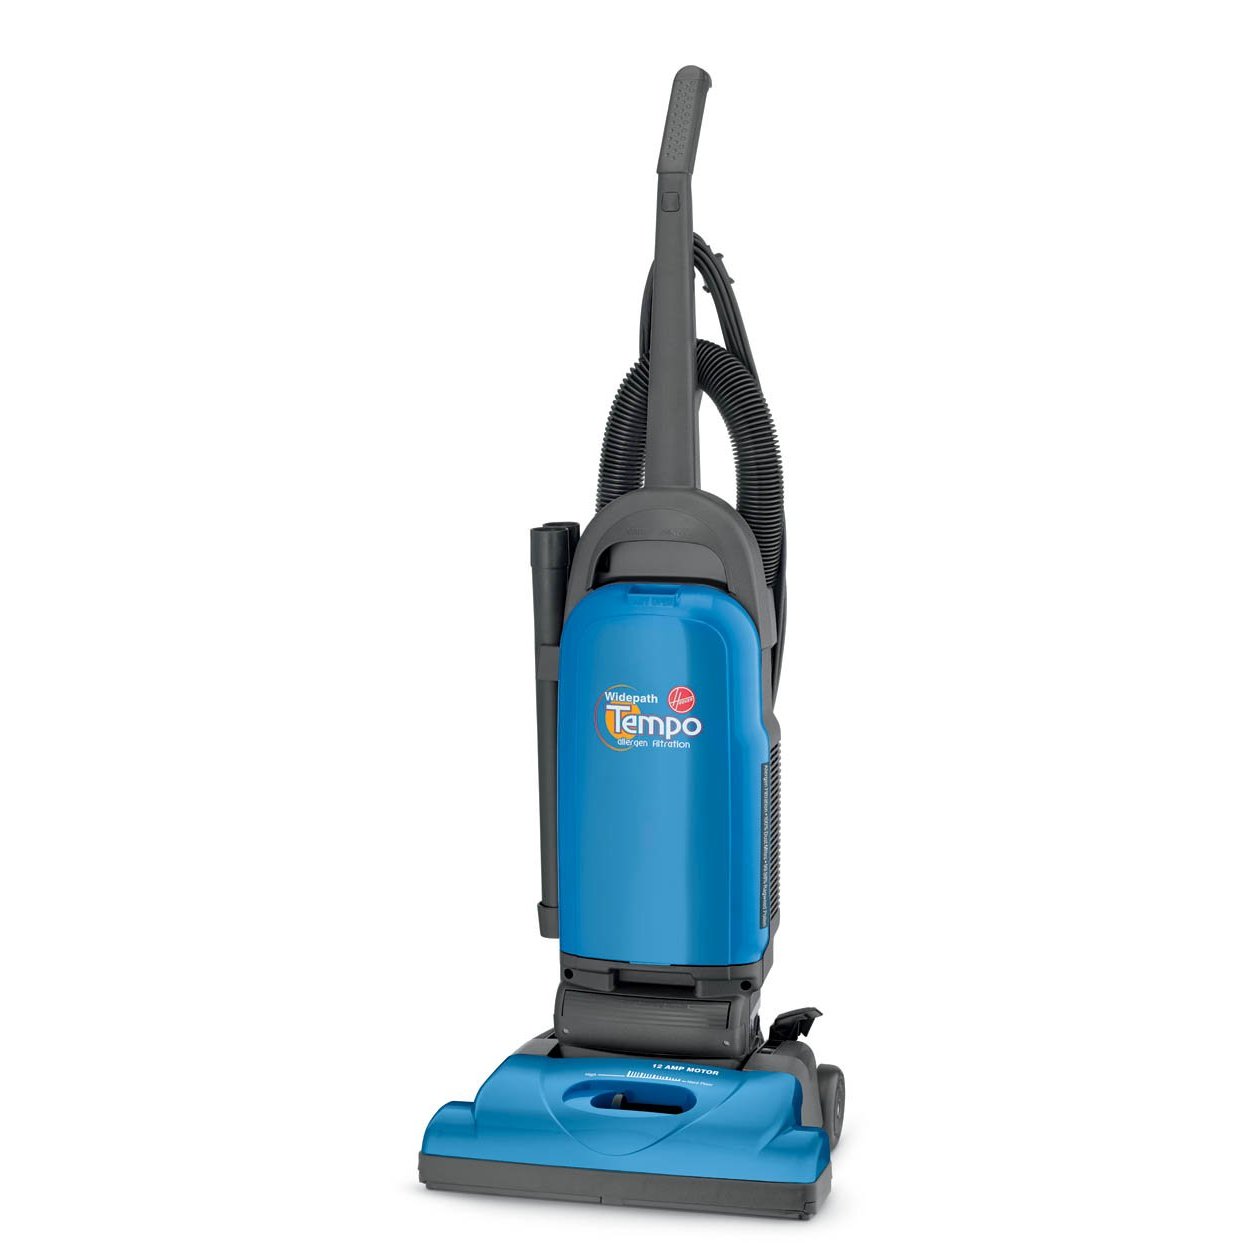 Hoover Tempo Widepath Upright Vacuum, Bagged $69.00(31% off) 